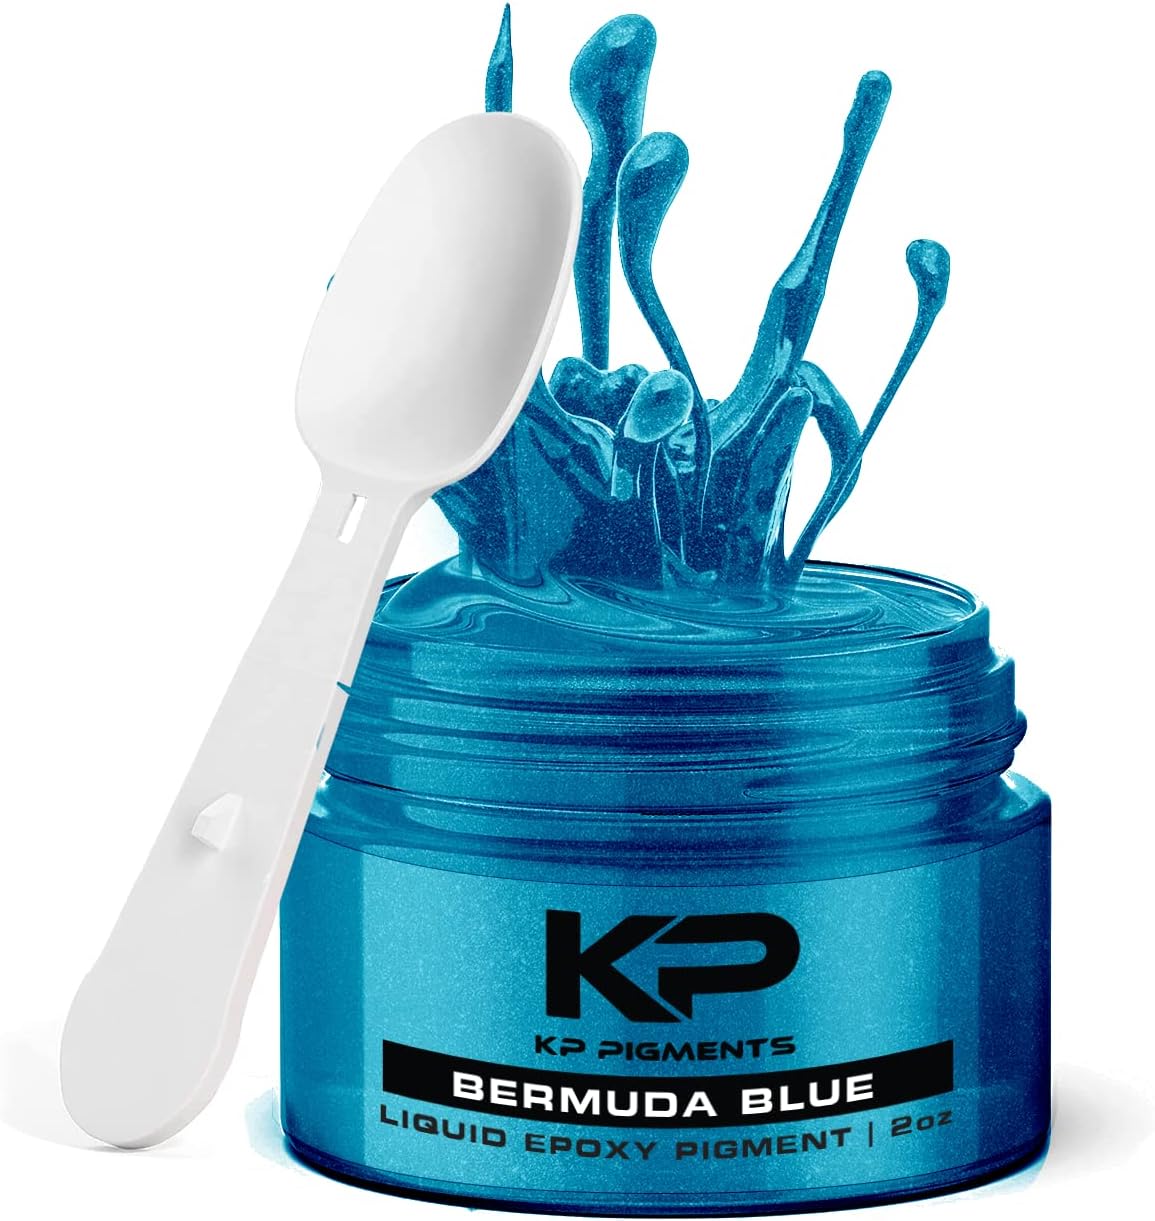 Load image into Gallery viewer, Bermuda Blue - Epoxy Pigment Paste for Epoxy Resin, Tint/Pigment Paste with Spoon for Arts and Crafts, Jewelry, Resin Woodworking and More!